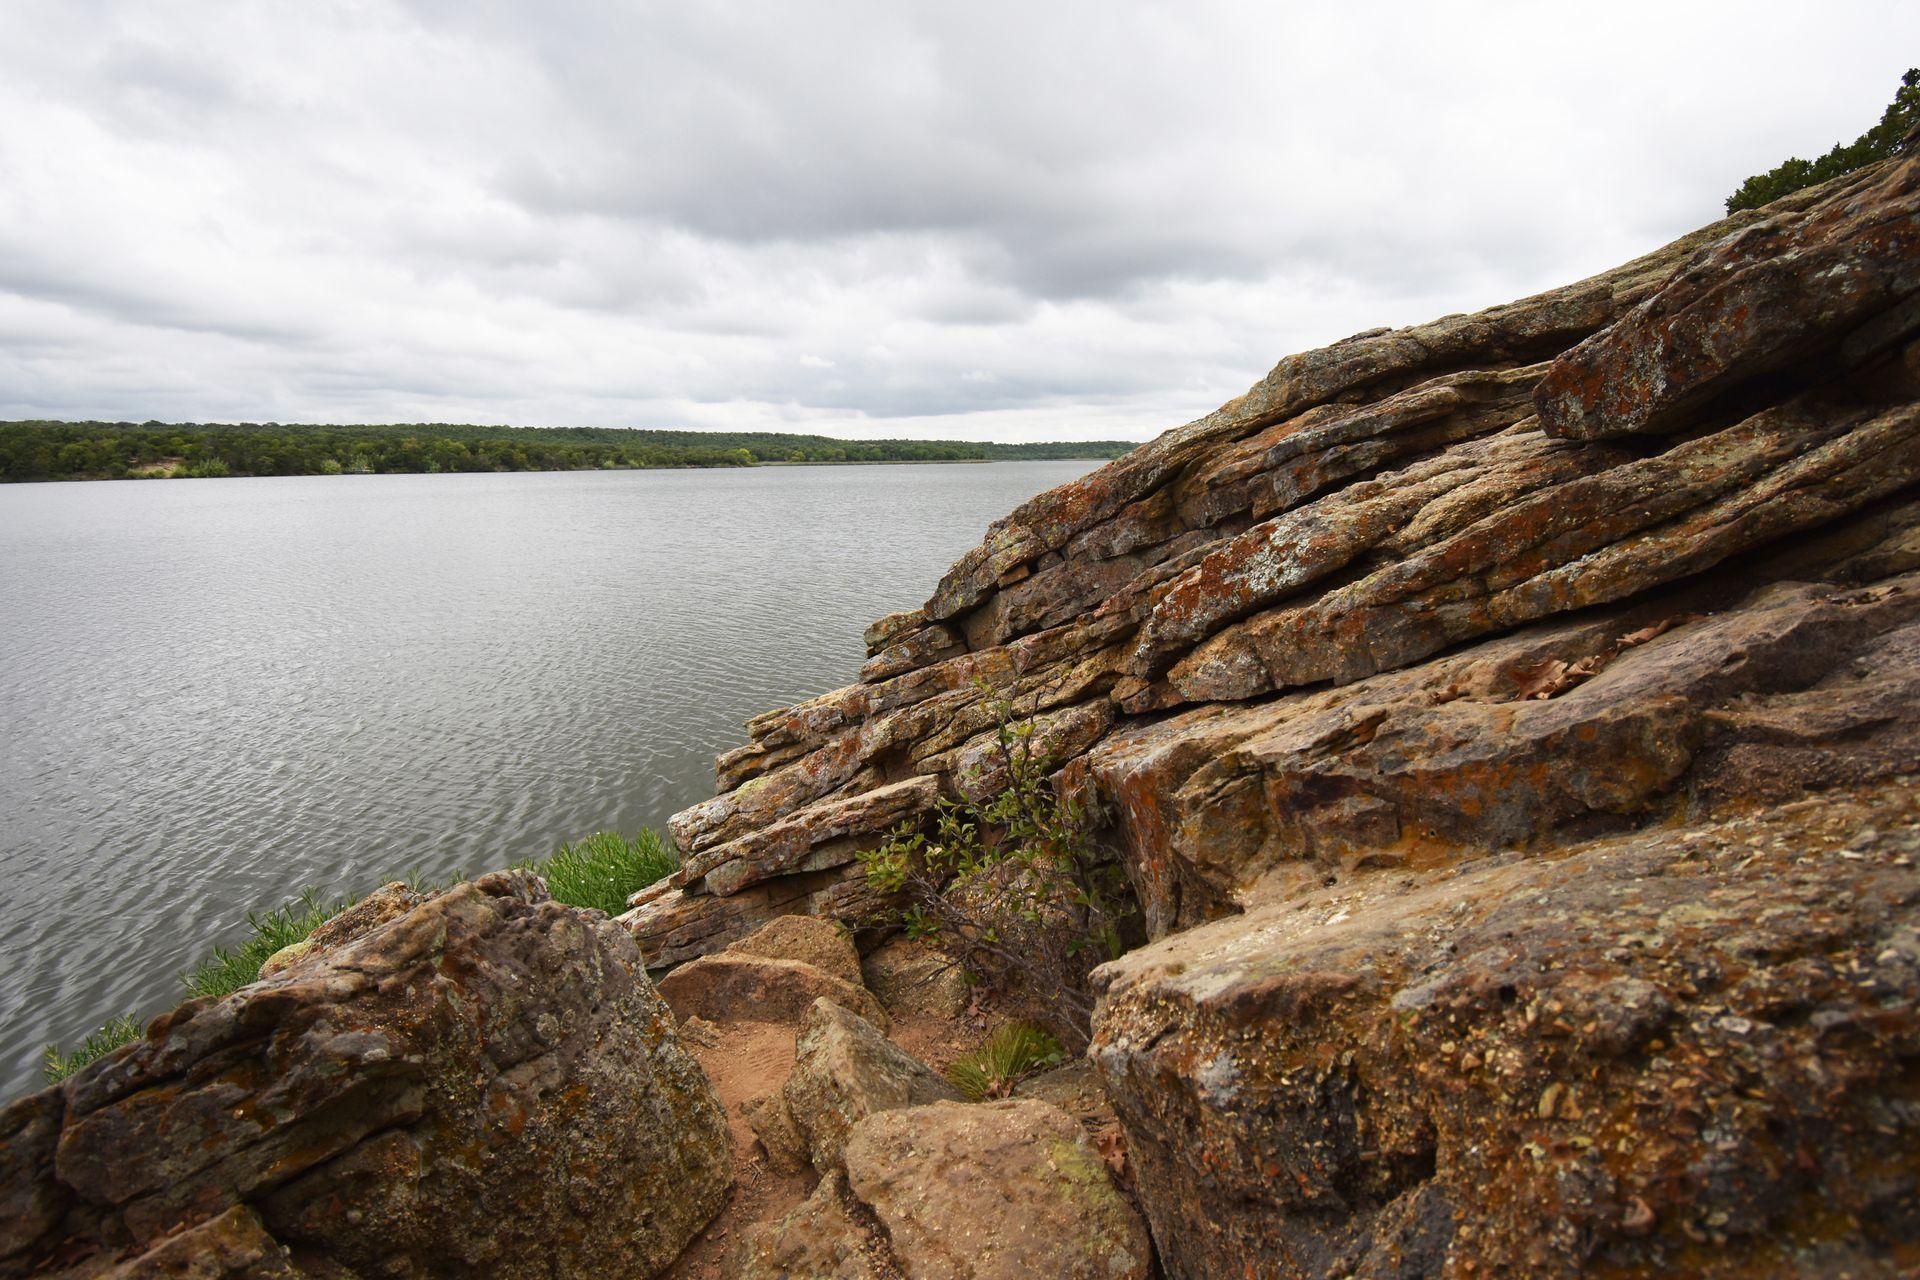 A view of rocks next to the river at Lake Mineral Wells State Park.